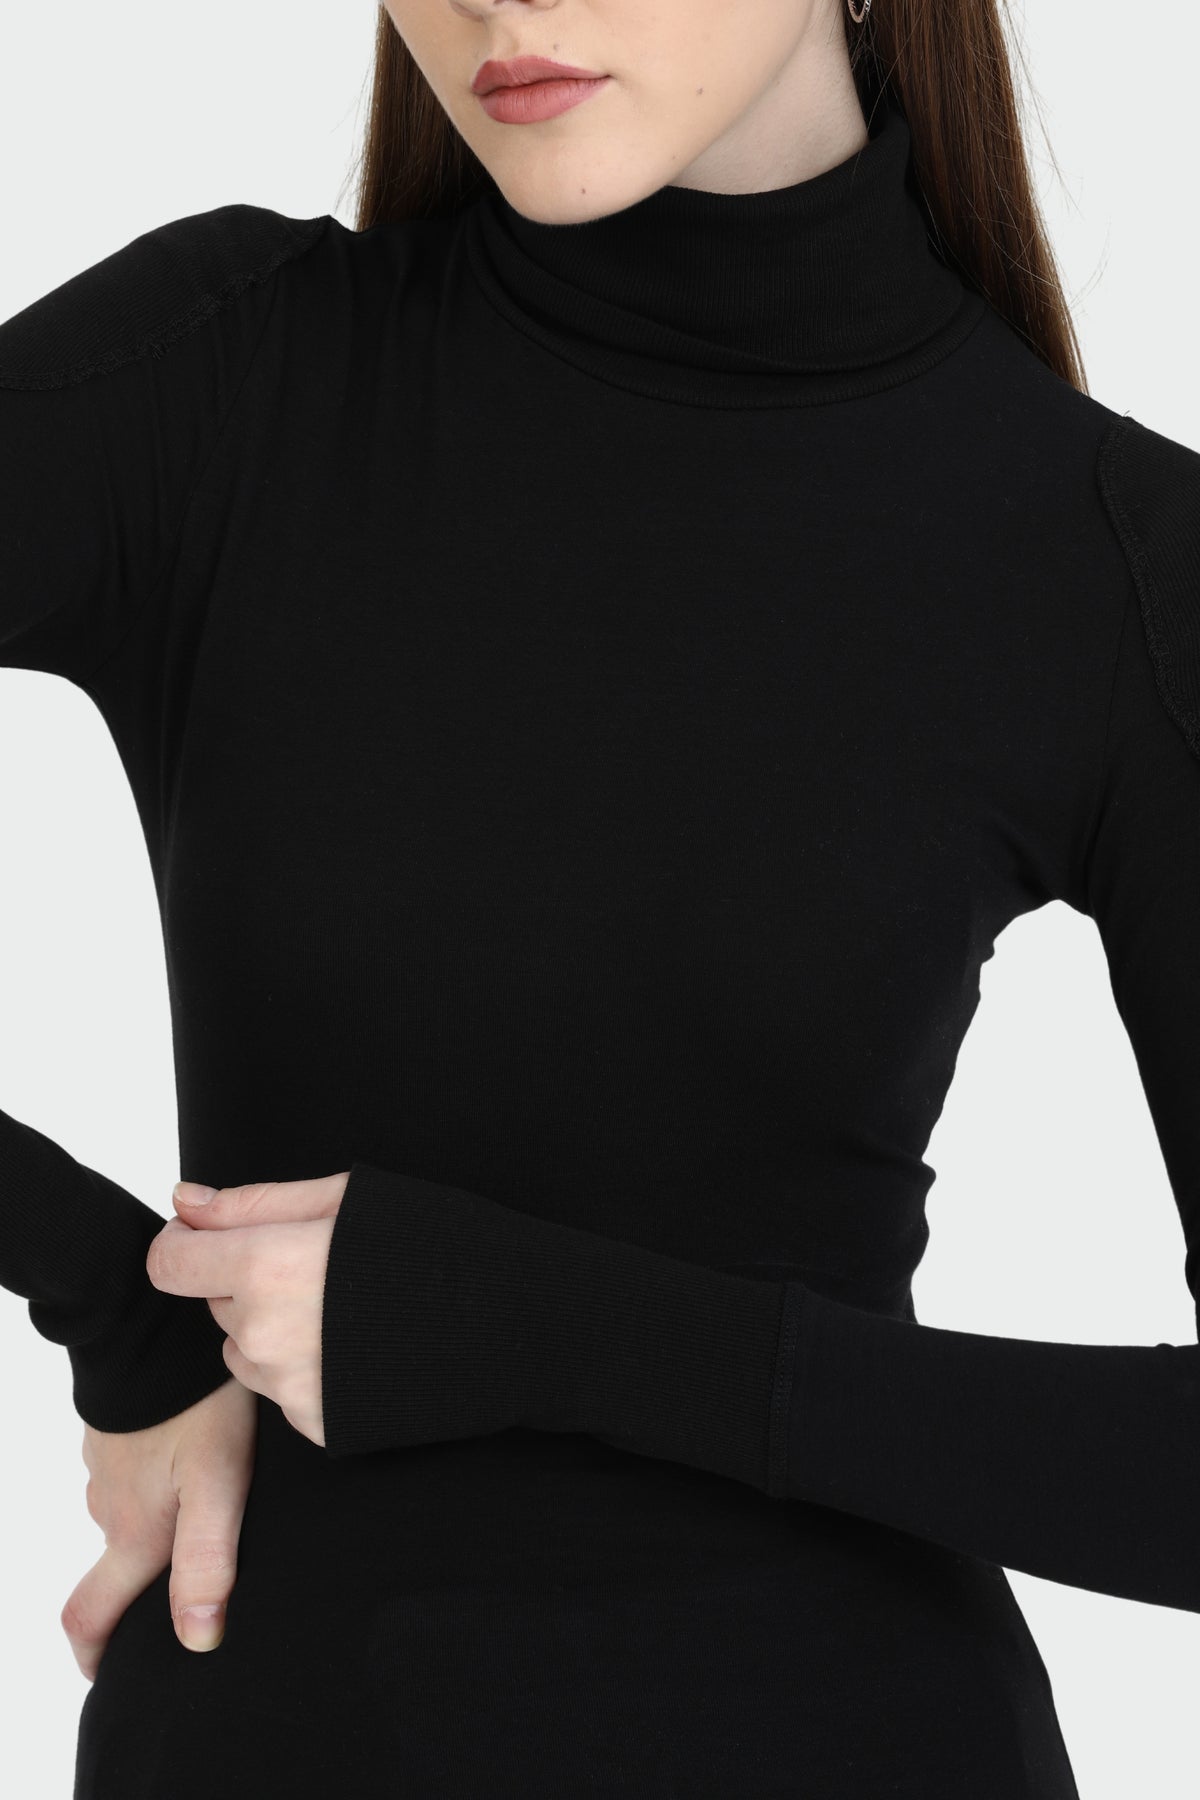 Heny Star Roll Neck Top